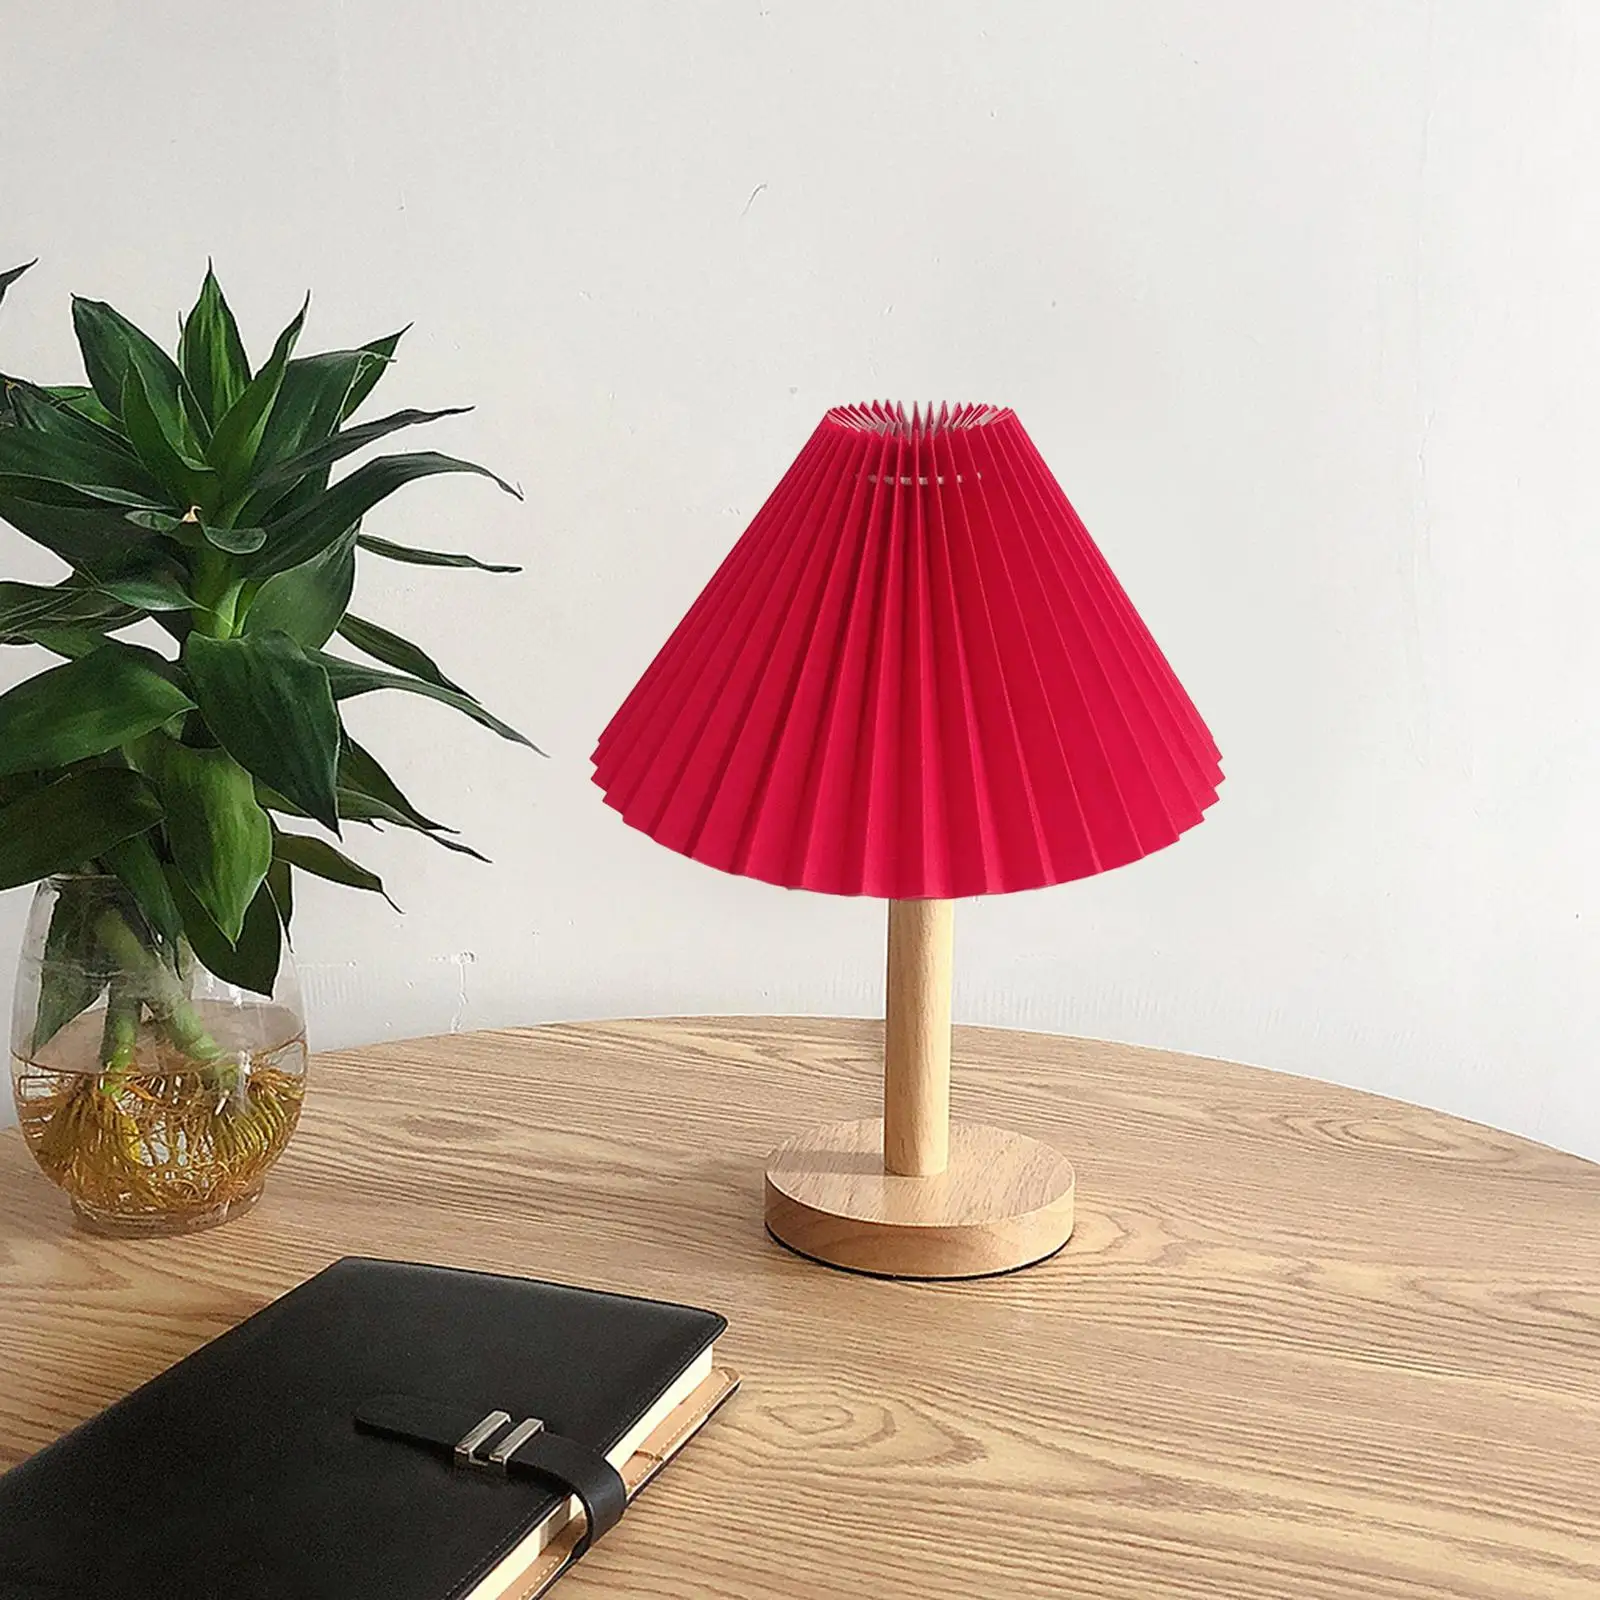 24cm Pleated Lampshade Office Ceiling Light Shade Replacement Floor Lamp